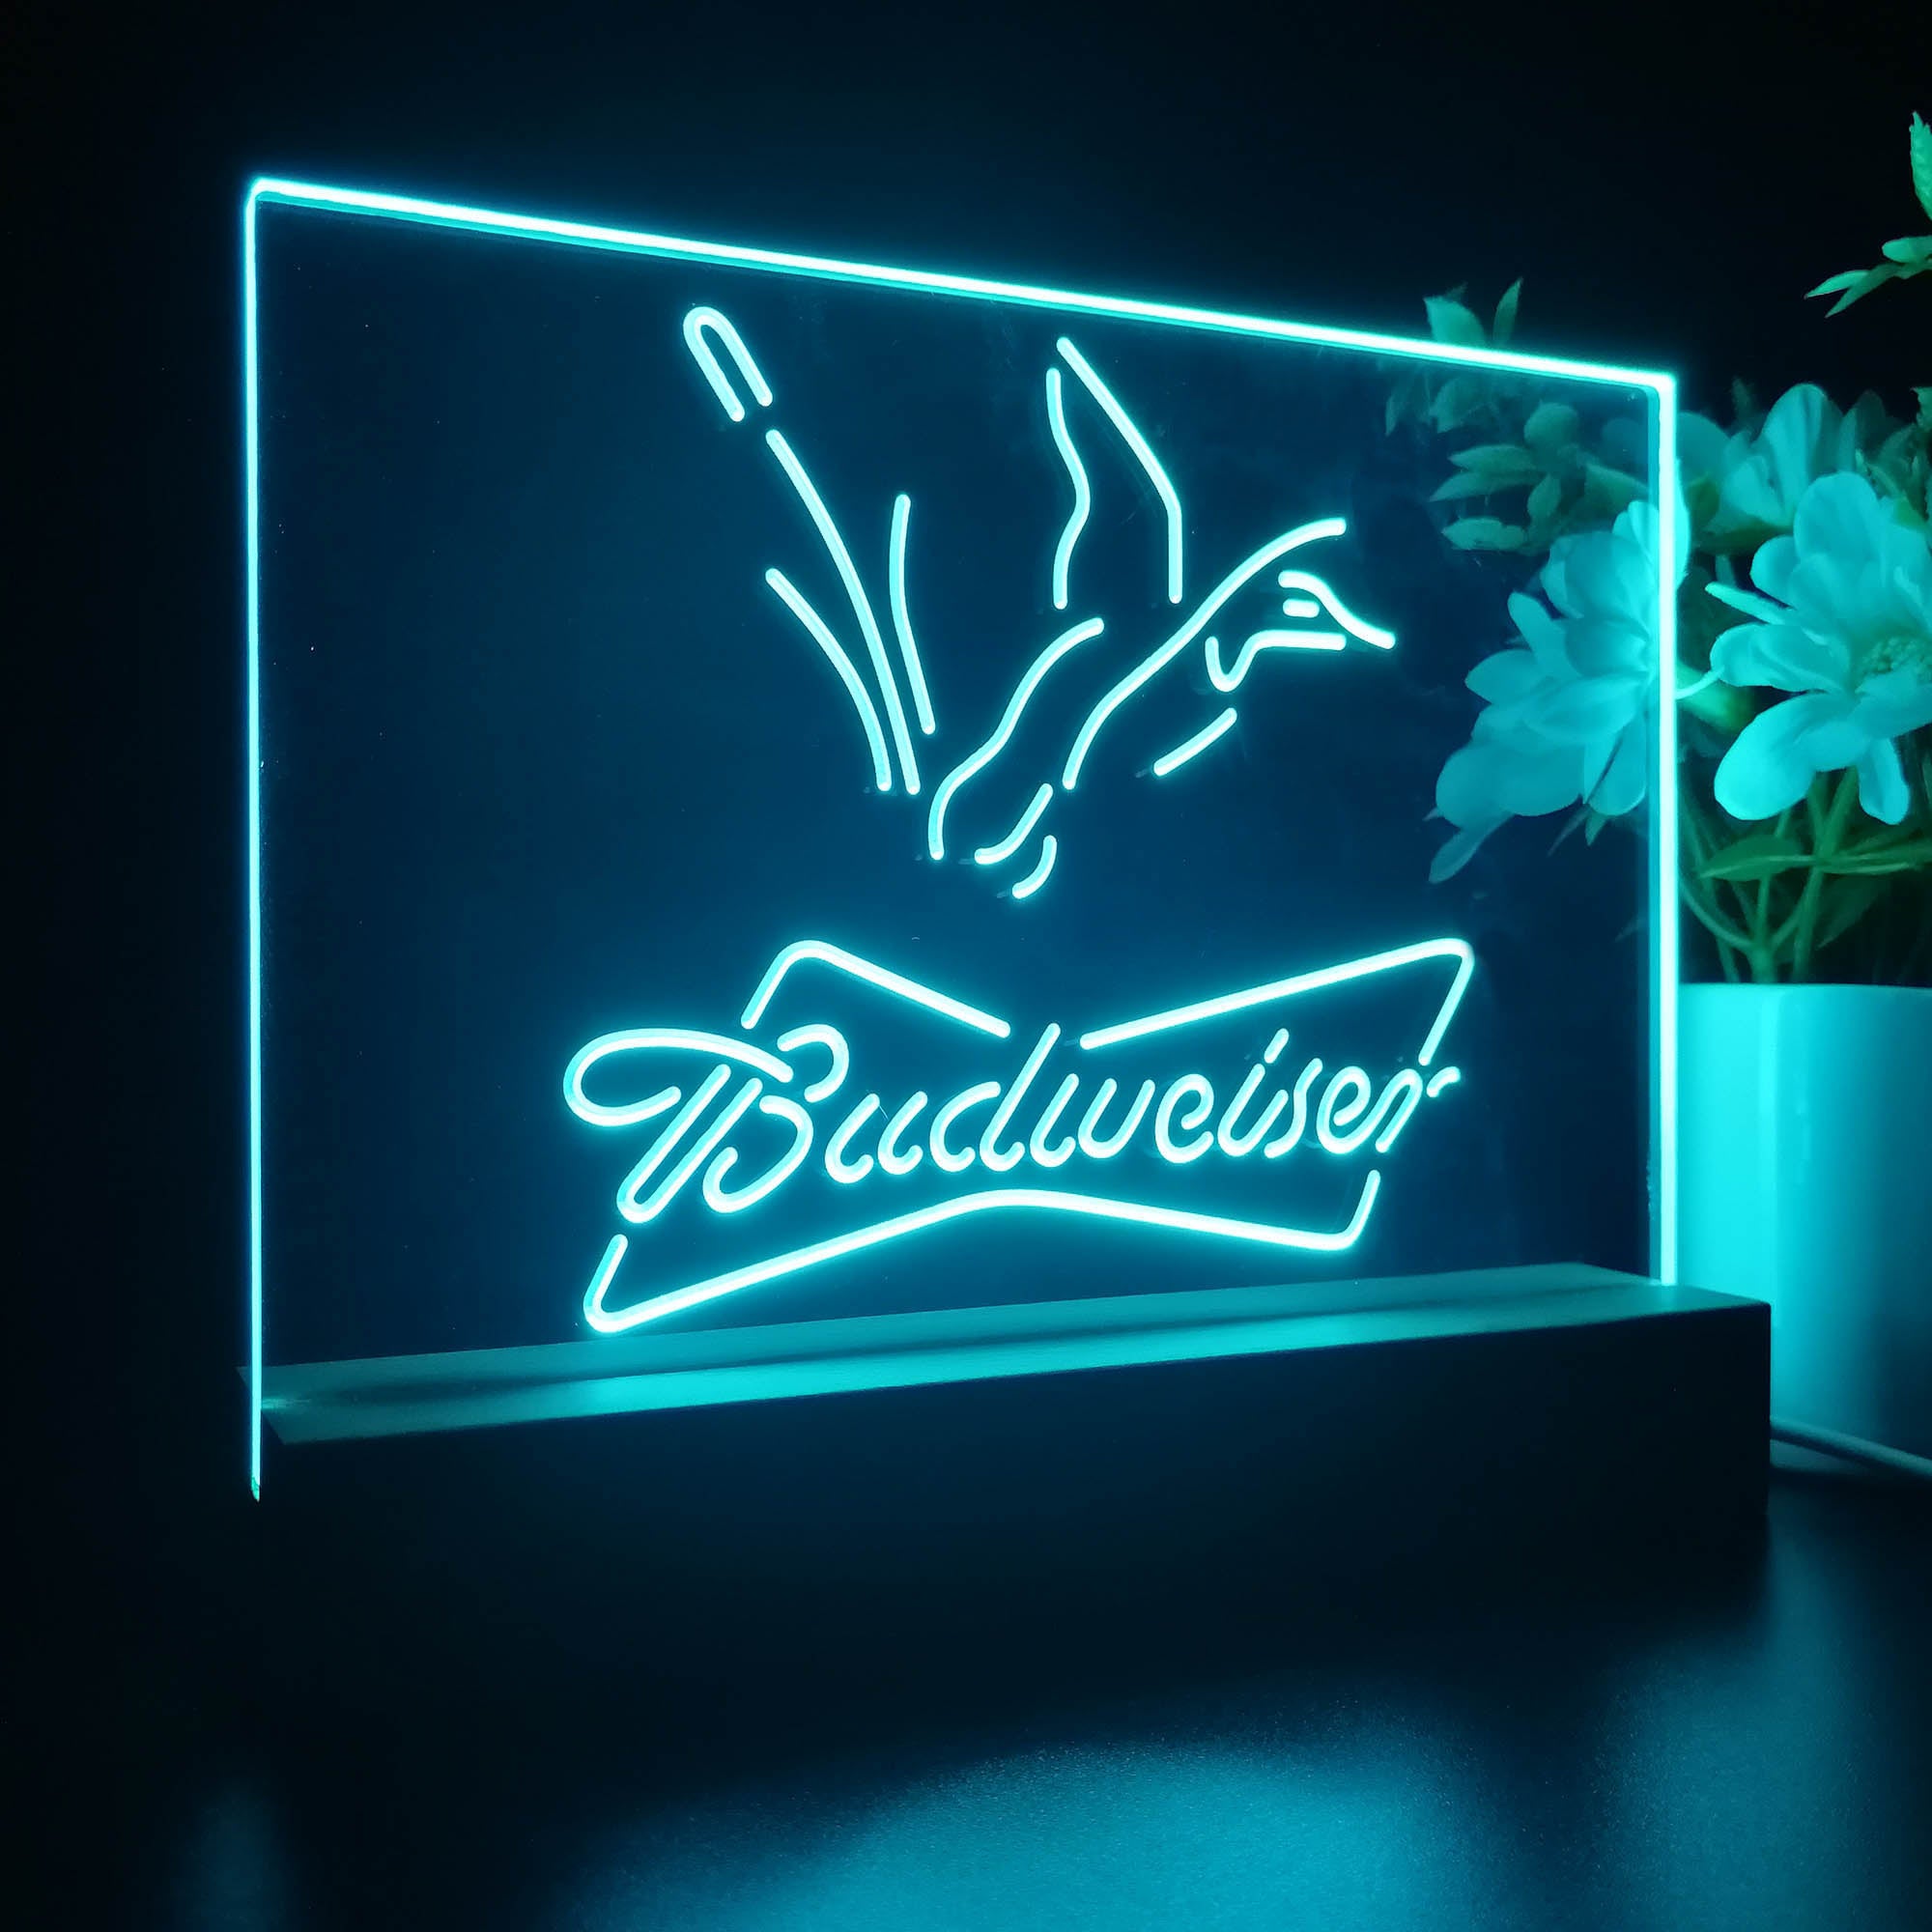 Budweisers Duck Hunting Home Beer Bar Decoration Gifts Night Light LED Sign